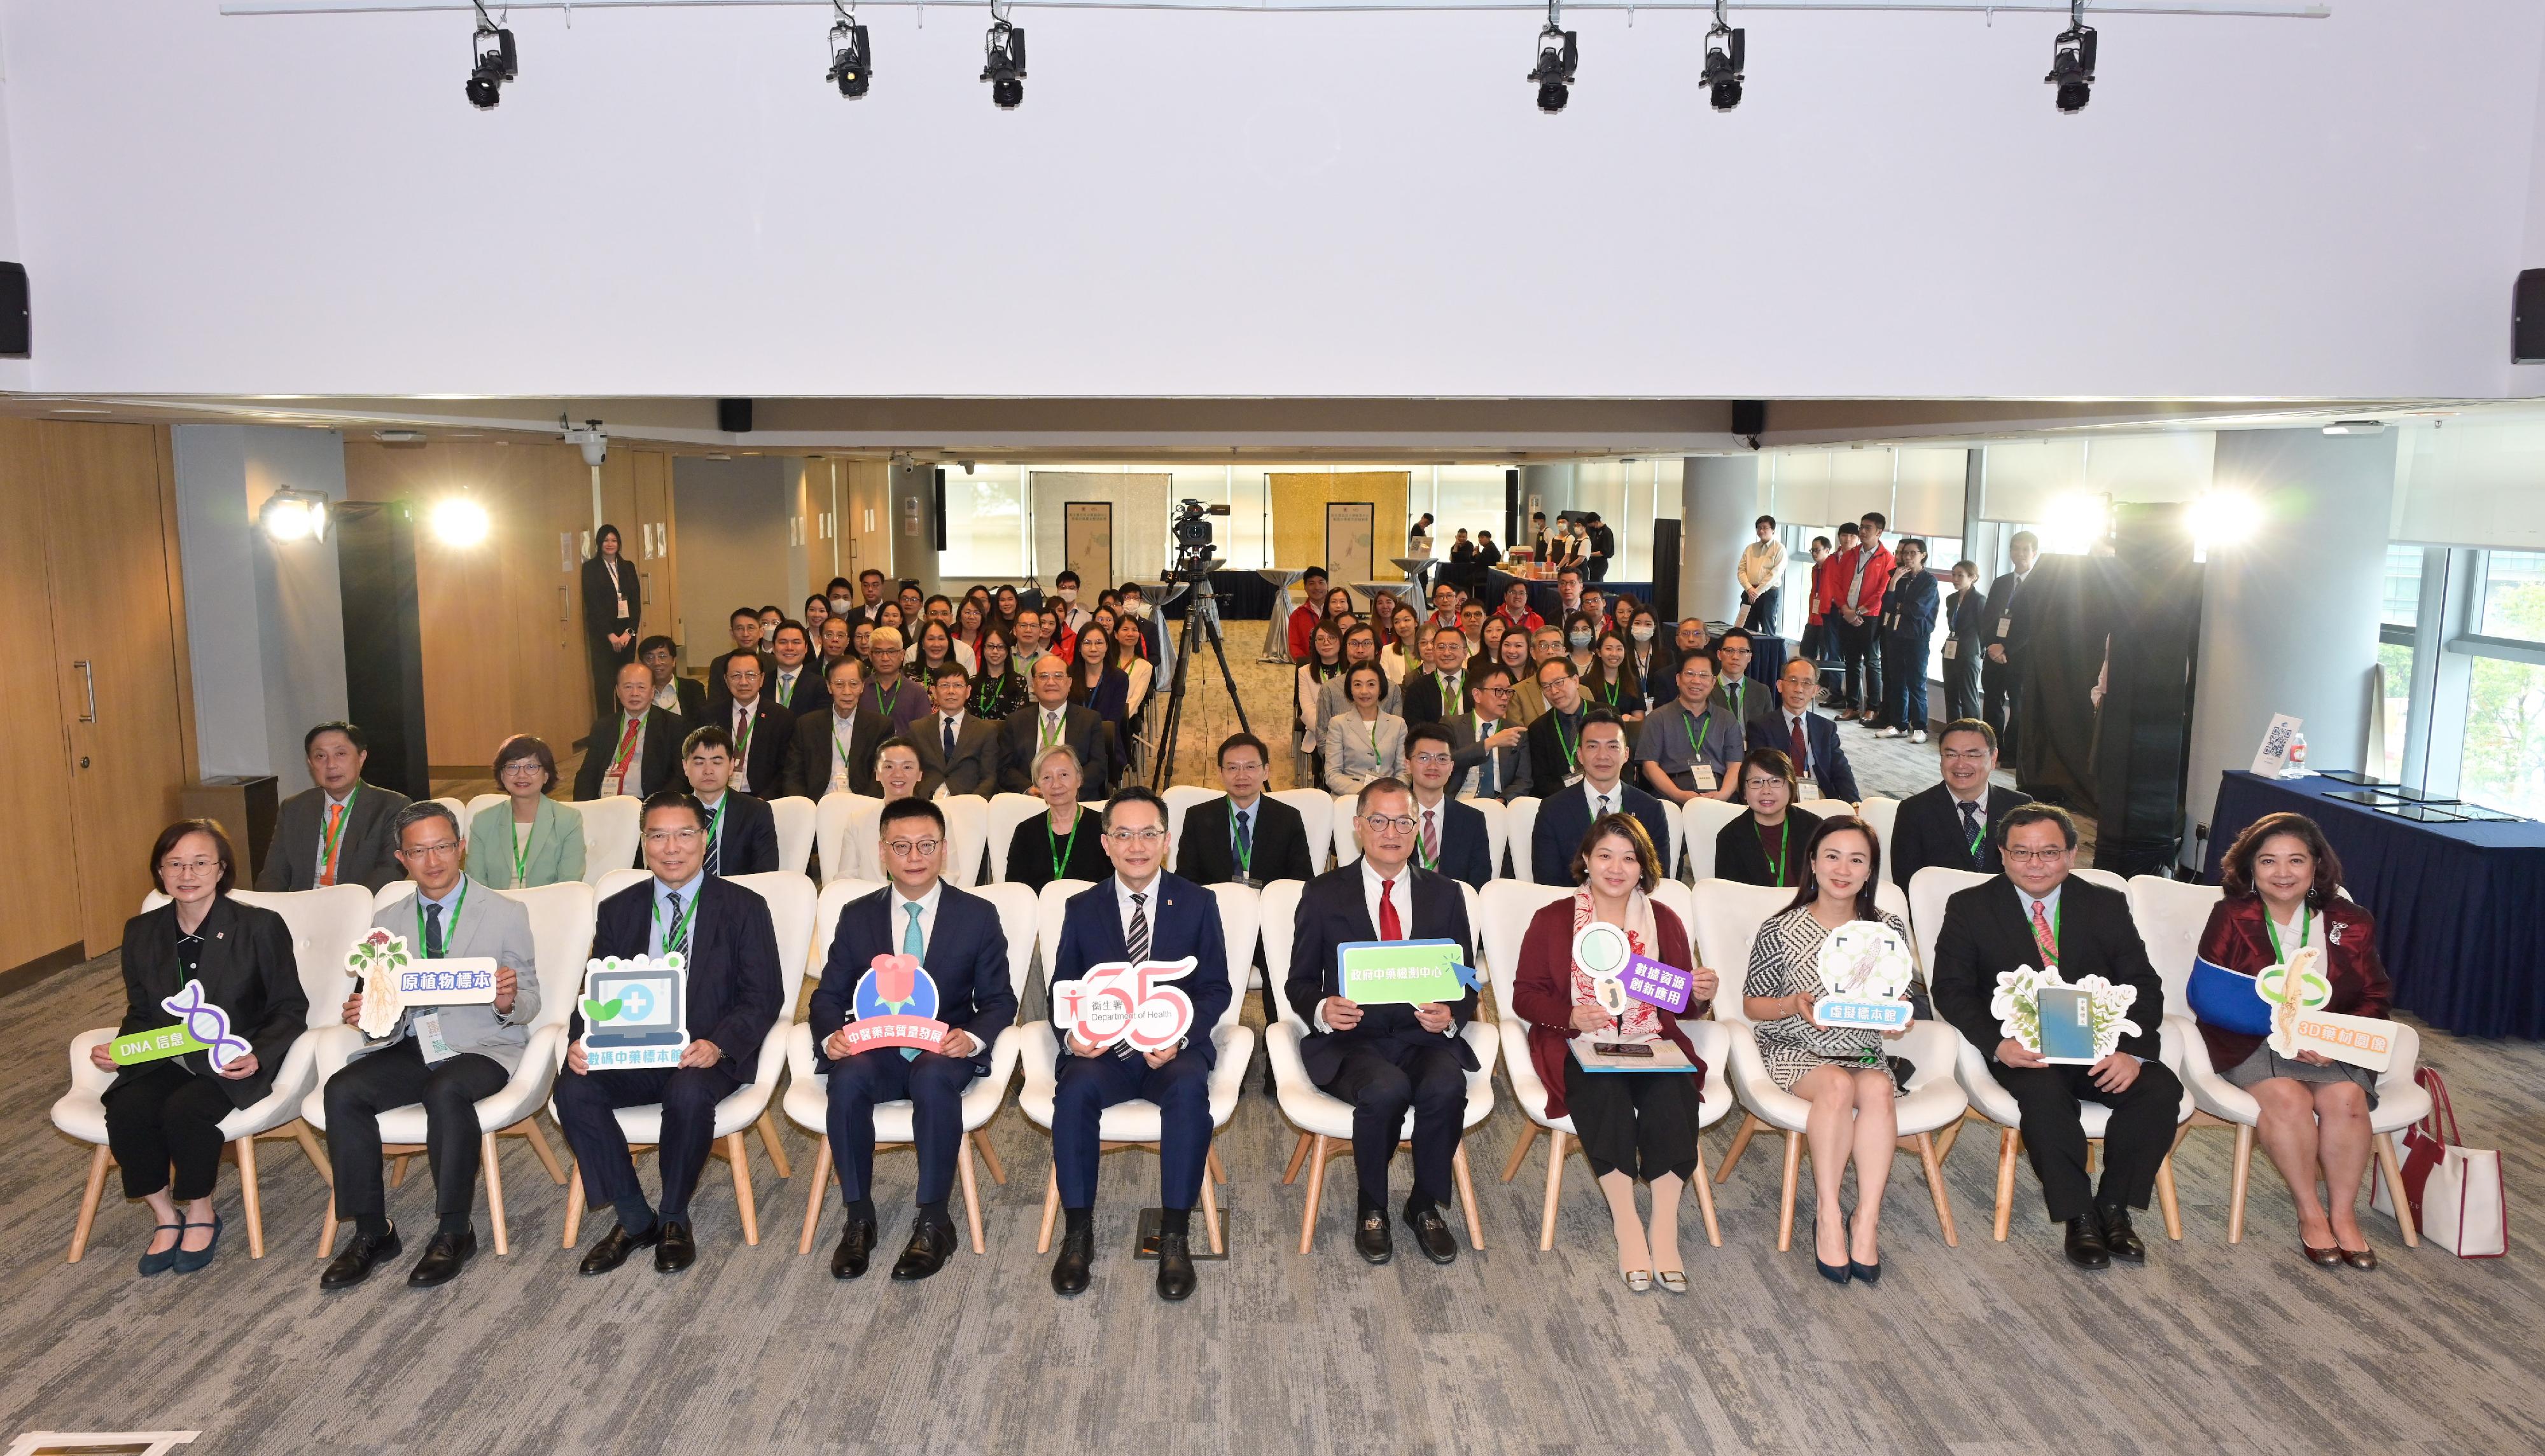 The Secretary for Health, Professor Lo Chung-mau, today (March 26) attended the launch ceremony of the Department of Health's new dedicated website Digital Herbarium for Chinese Medicines. Photo shows Professor Lo (first row, fifth right); the Under Secretary for Health, Dr Libby Lee (first row, fourth right); the Director of Health, Dr Ronald Lam (first row, fifth left); the Deputy Director-General of the Coordination Department of the Liaison Office of the Central People's Government in the Hong Kong Special Administrative Region, Mr Xu Xiaolin (first row, fourth left); the Chairman of the Advisory Committee of the Government Chinese Medicines Testing Institute, Mr Li Ying-sang (first row, third left) and other guests.